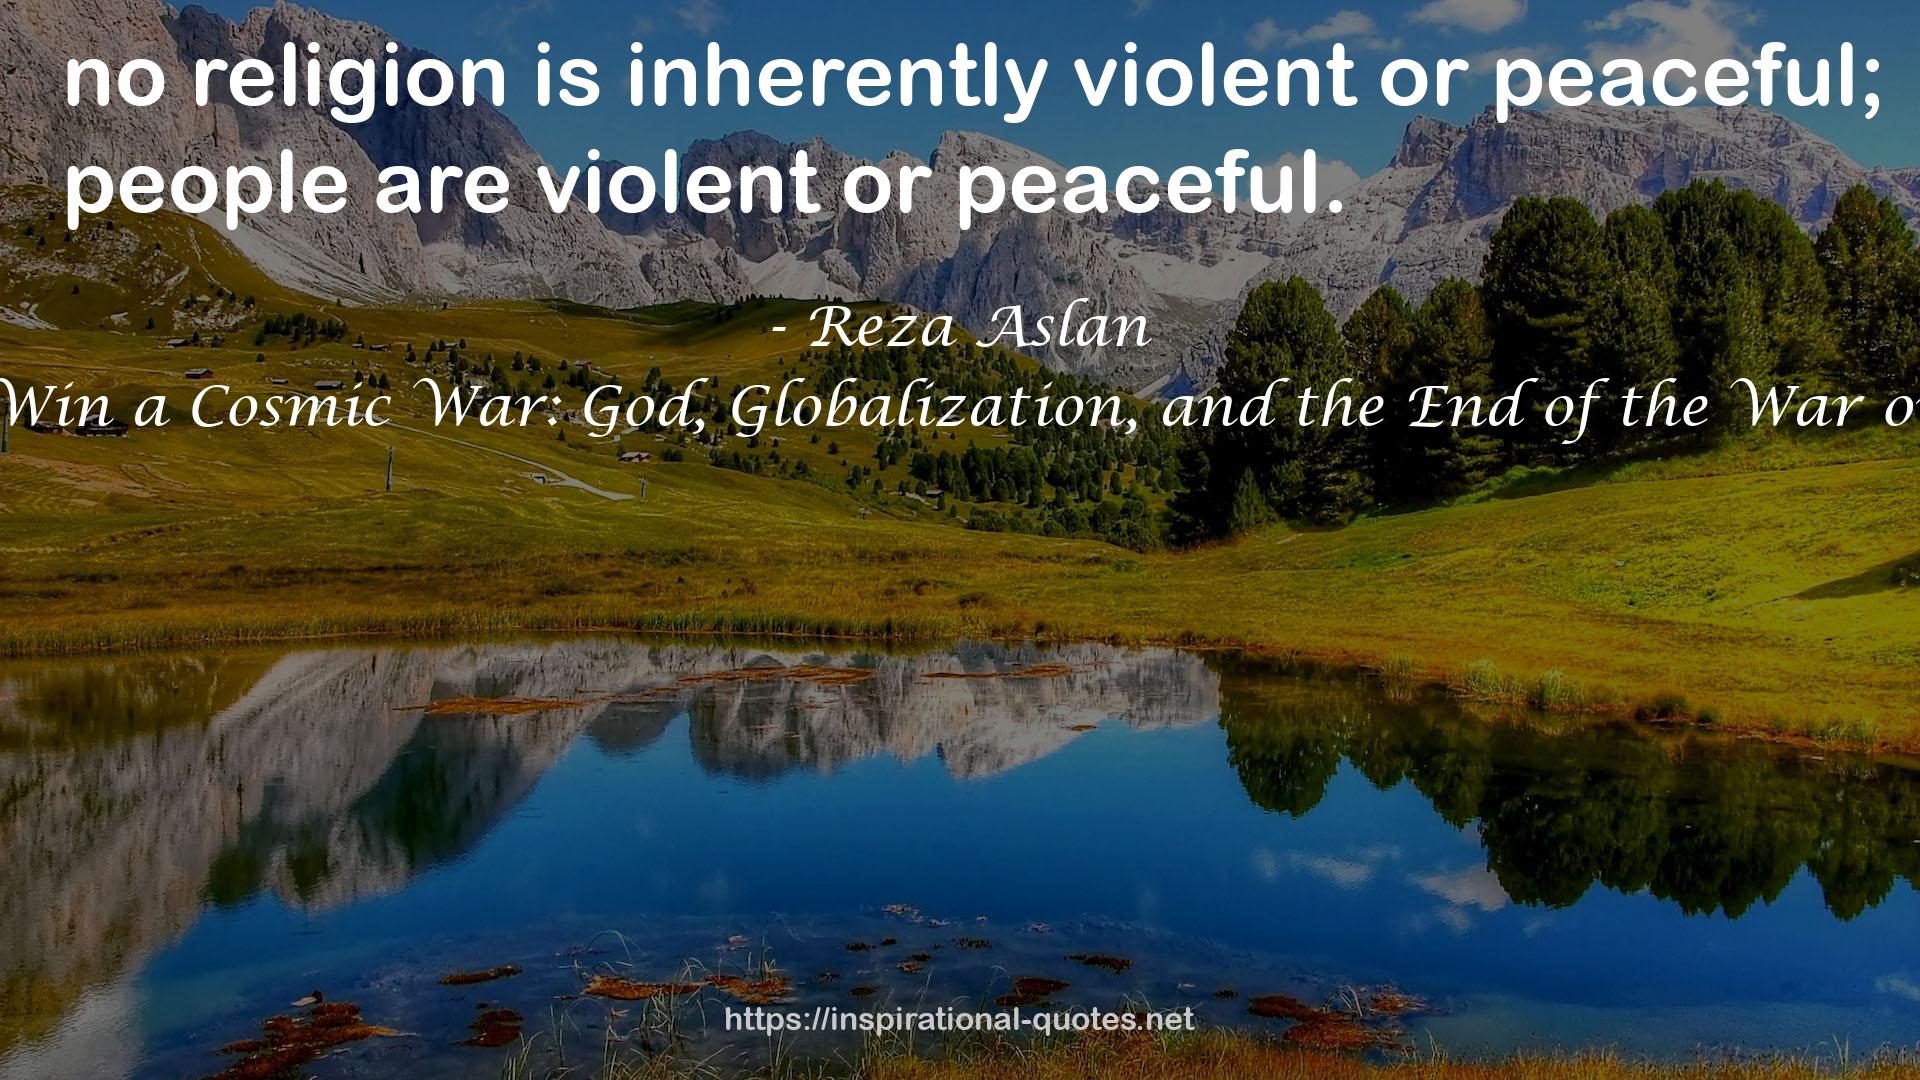 How to Win a Cosmic War: God, Globalization, and the End of the War on Terror QUOTES